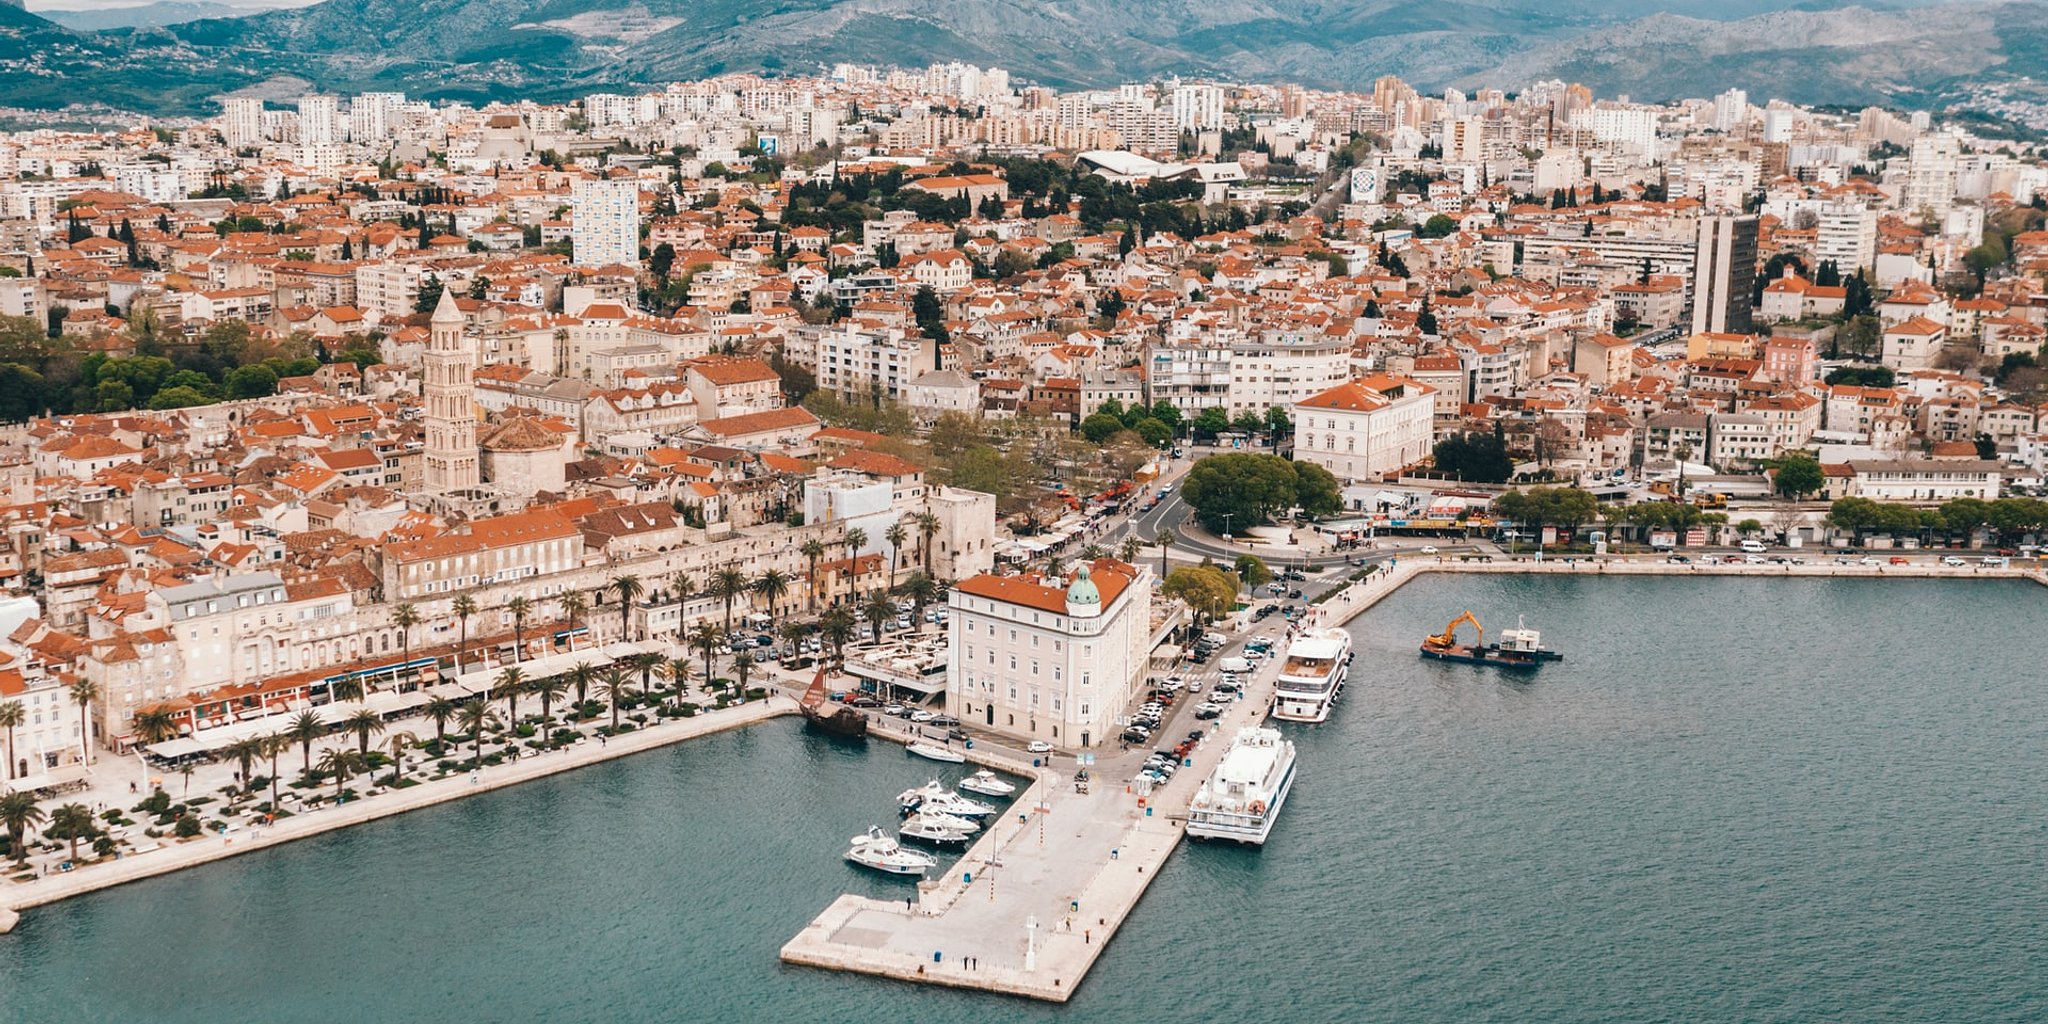 12 Best Things To Do in Spilt, Croatia by Itinsy